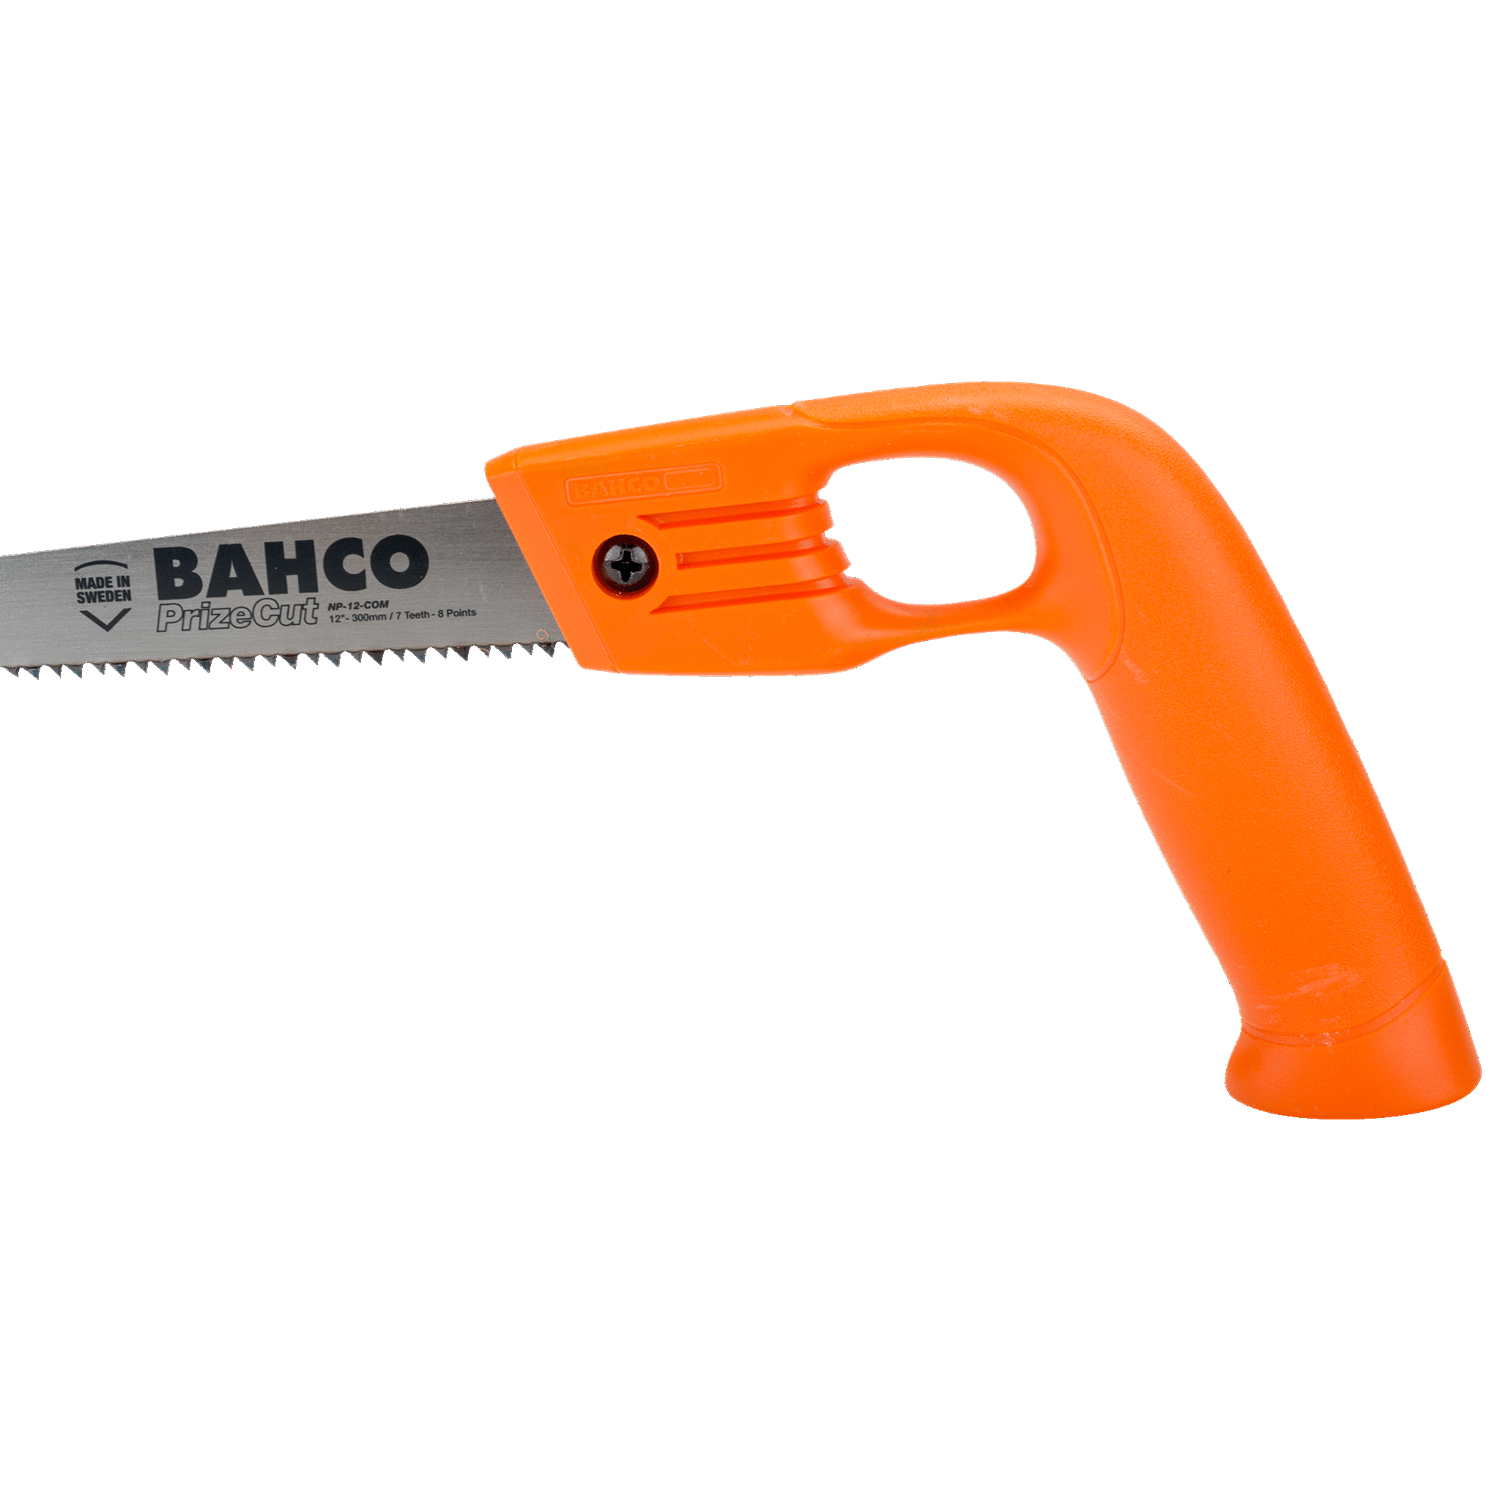 BAHCO NP-COM PrizeCut Compass Saw for Wood/ Plastic (BAHCO Tools) - Premium Compass Saw from BAHCO - Shop now at Yew Aik.